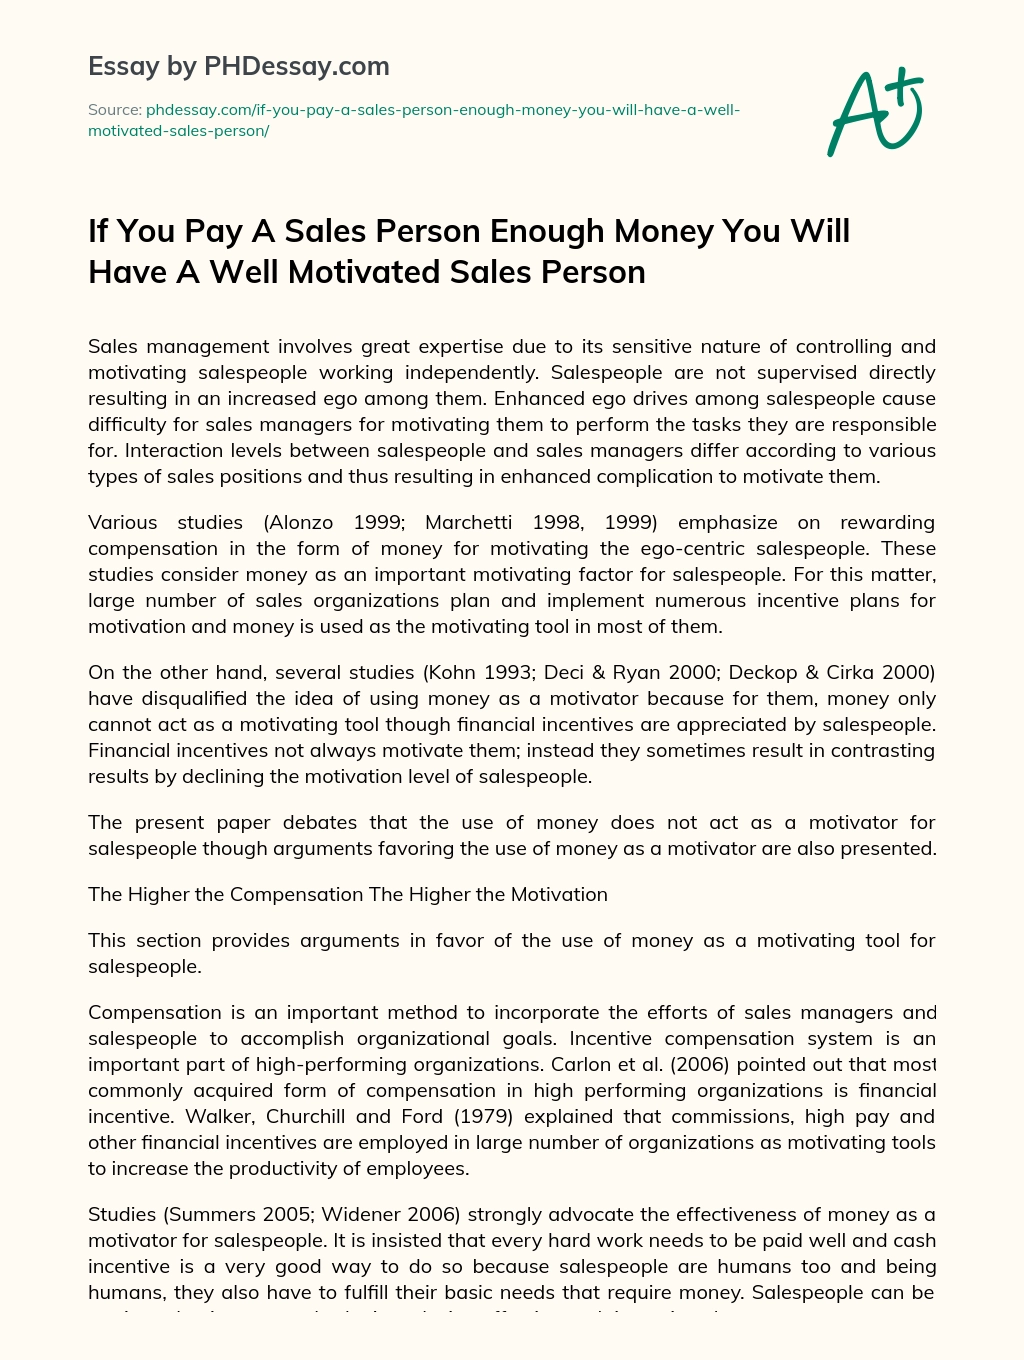 If You Pay A Sales Person Enough Money You Will Have A Well Motivated Sales Person essay